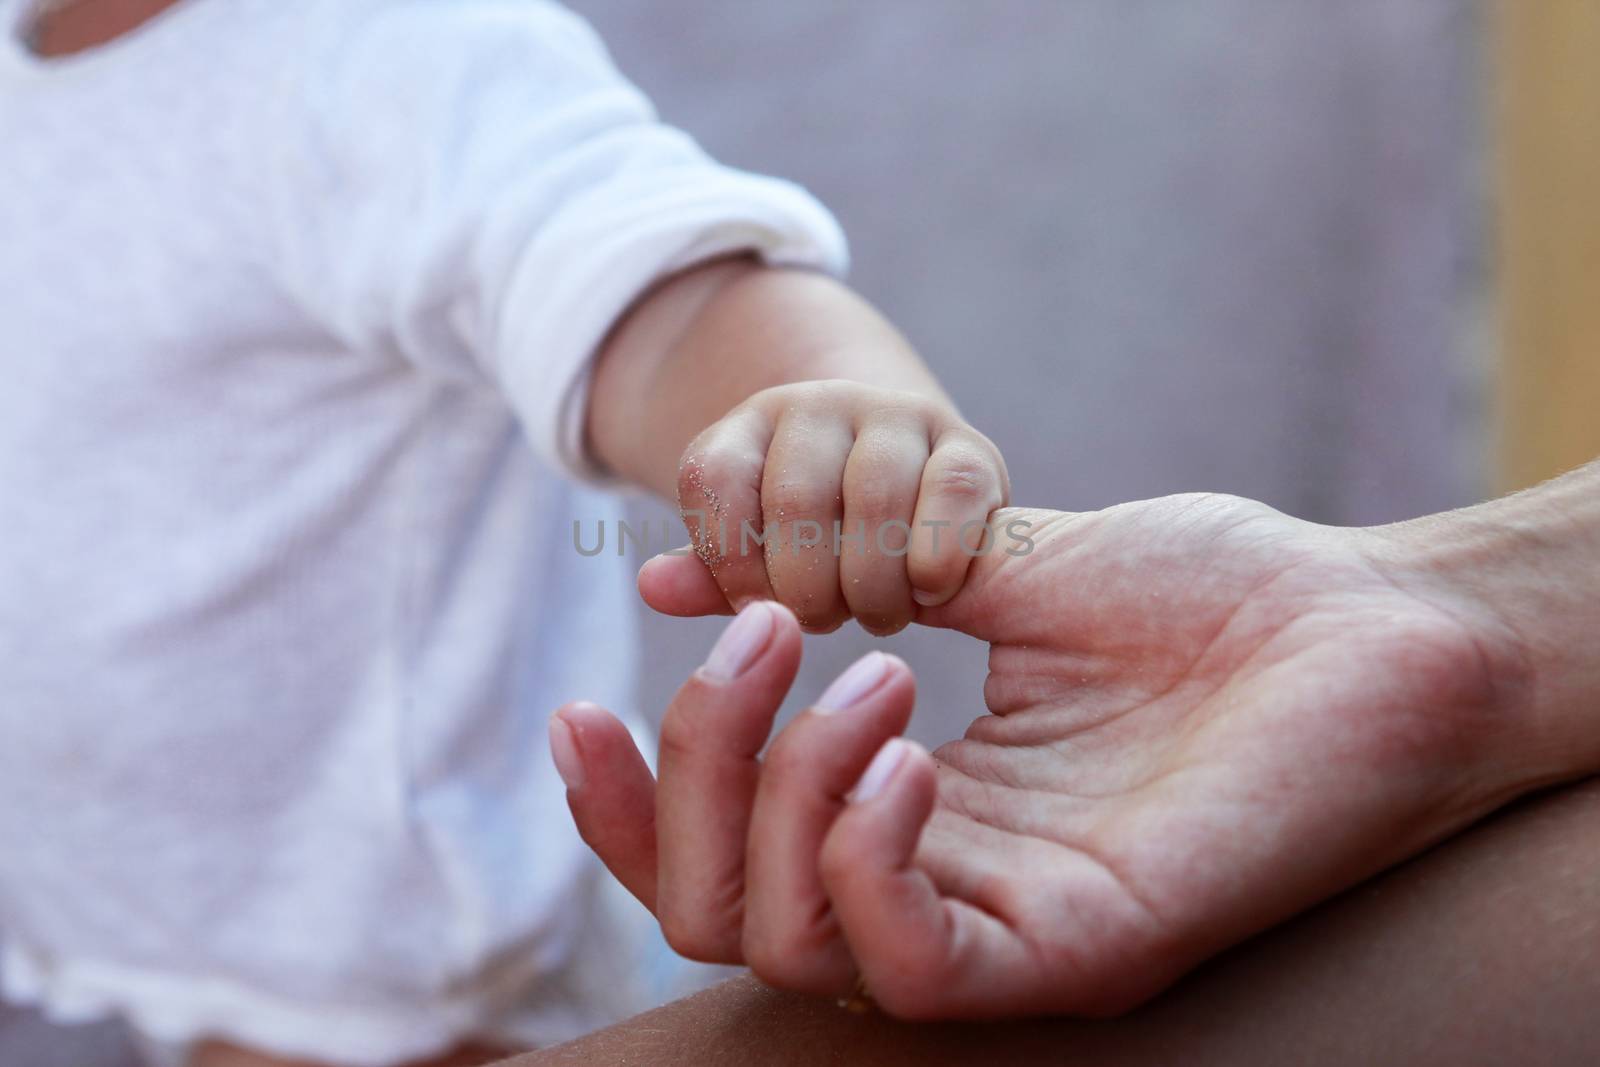 The image of hands of parents and the child